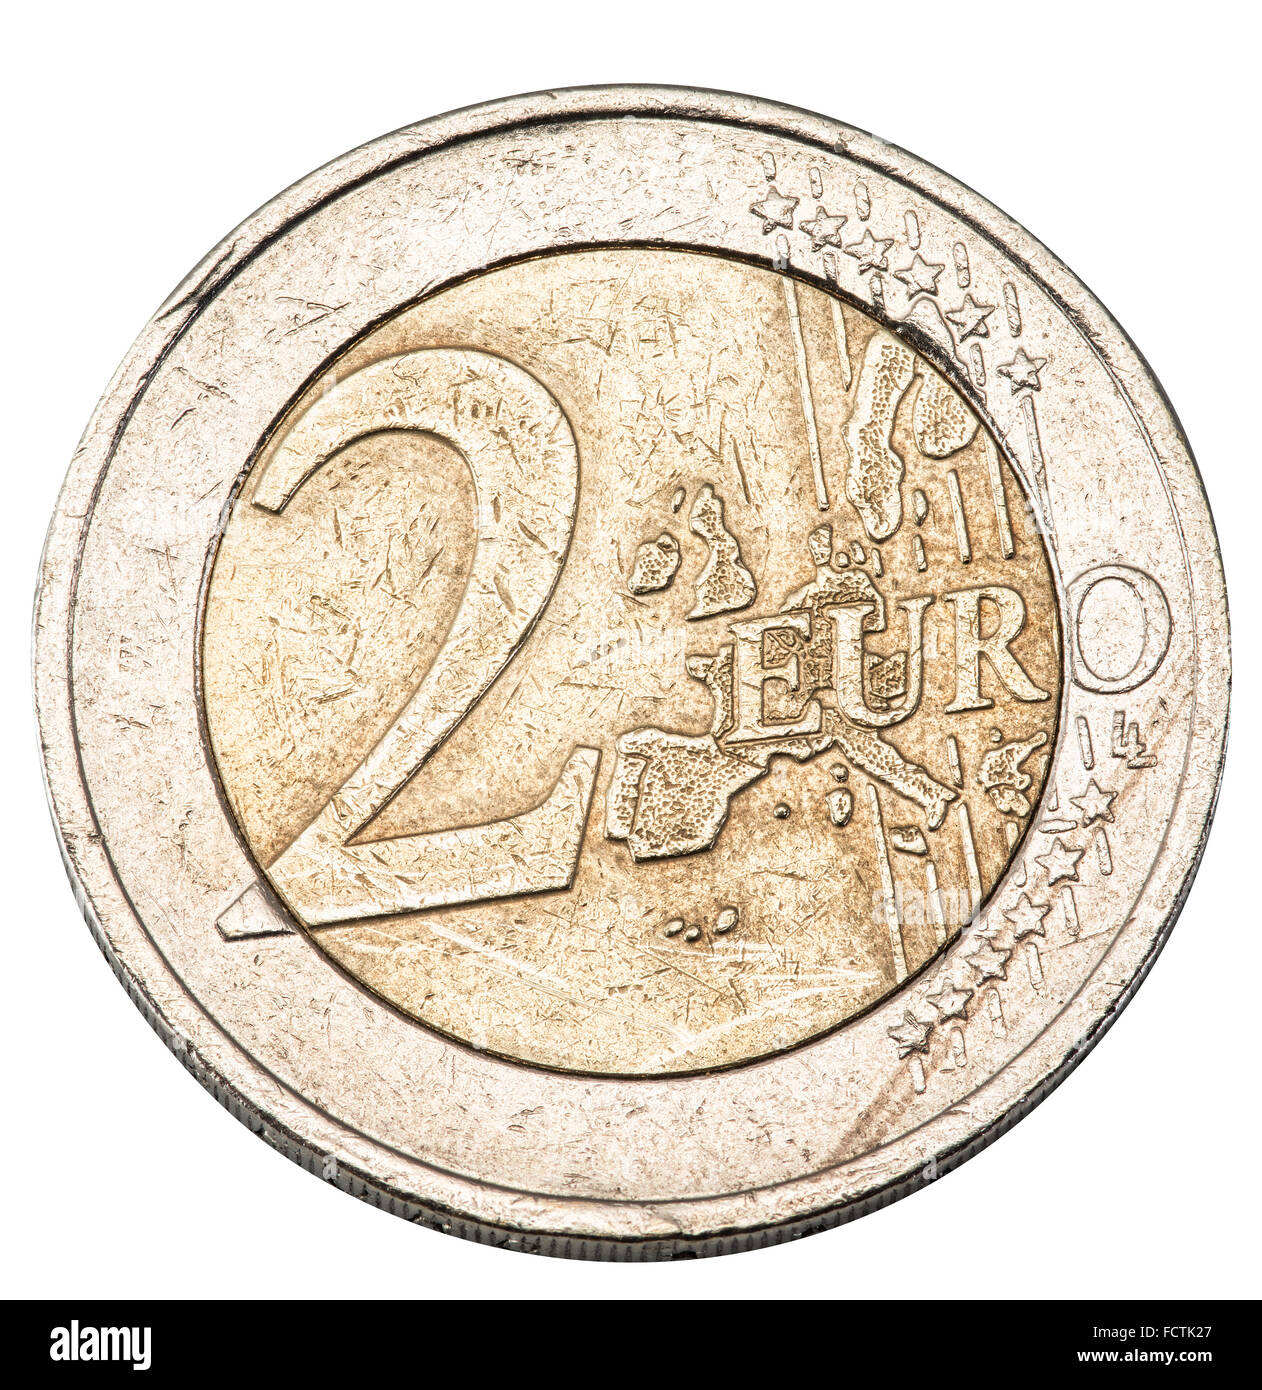 Old two euro coin isolated on a white background. File contains clipping paths. Stock Photo